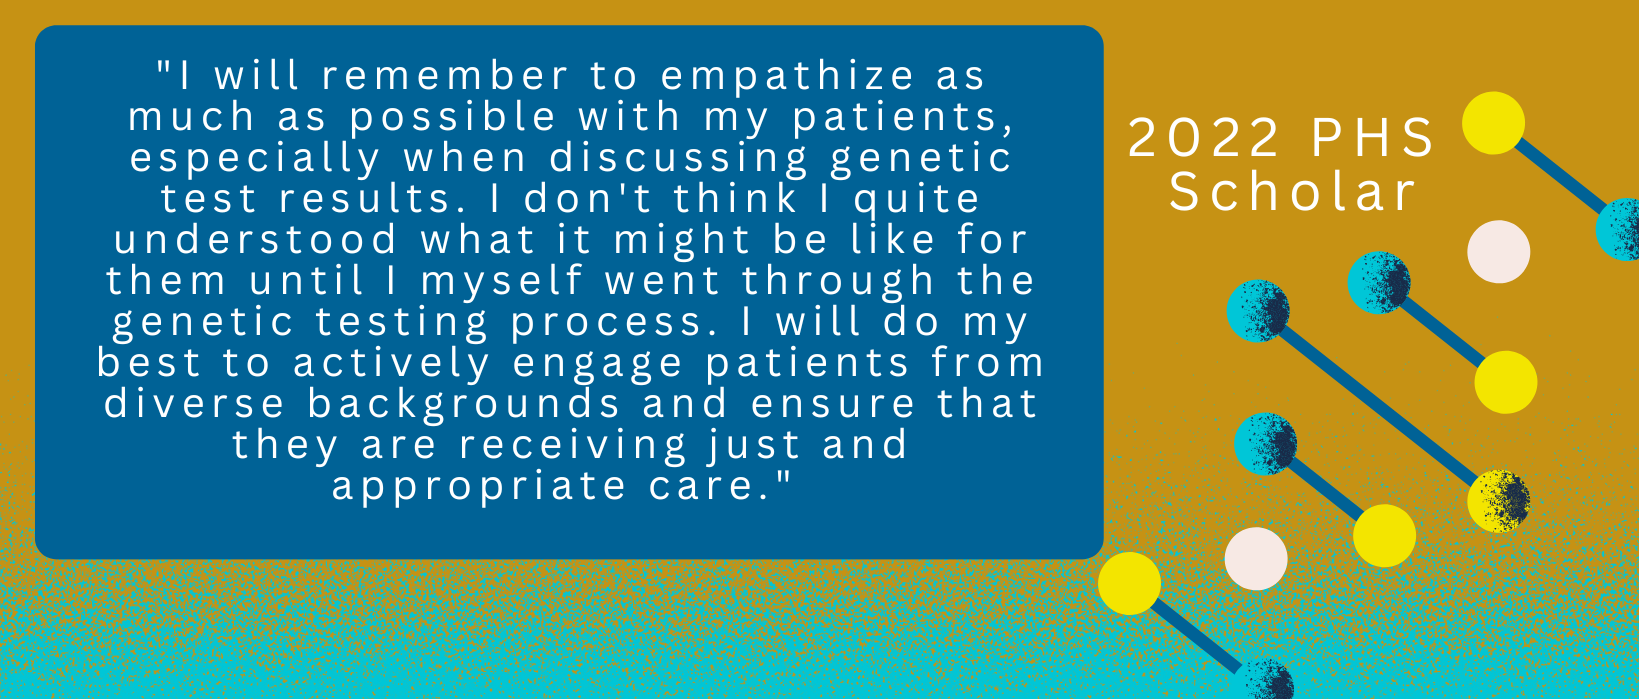 2 of 4, Quote from a 2022 PHS Scholar: "I will remember to empathize as much as possible with my patients, especially when discussing genetic test results. I don't think I quite understood what it might be like for them until I myself went through the genetic testing process. I will do my best to actively engage patients from diverse backgrounds and ensure that they are receiving just and appropriate care."